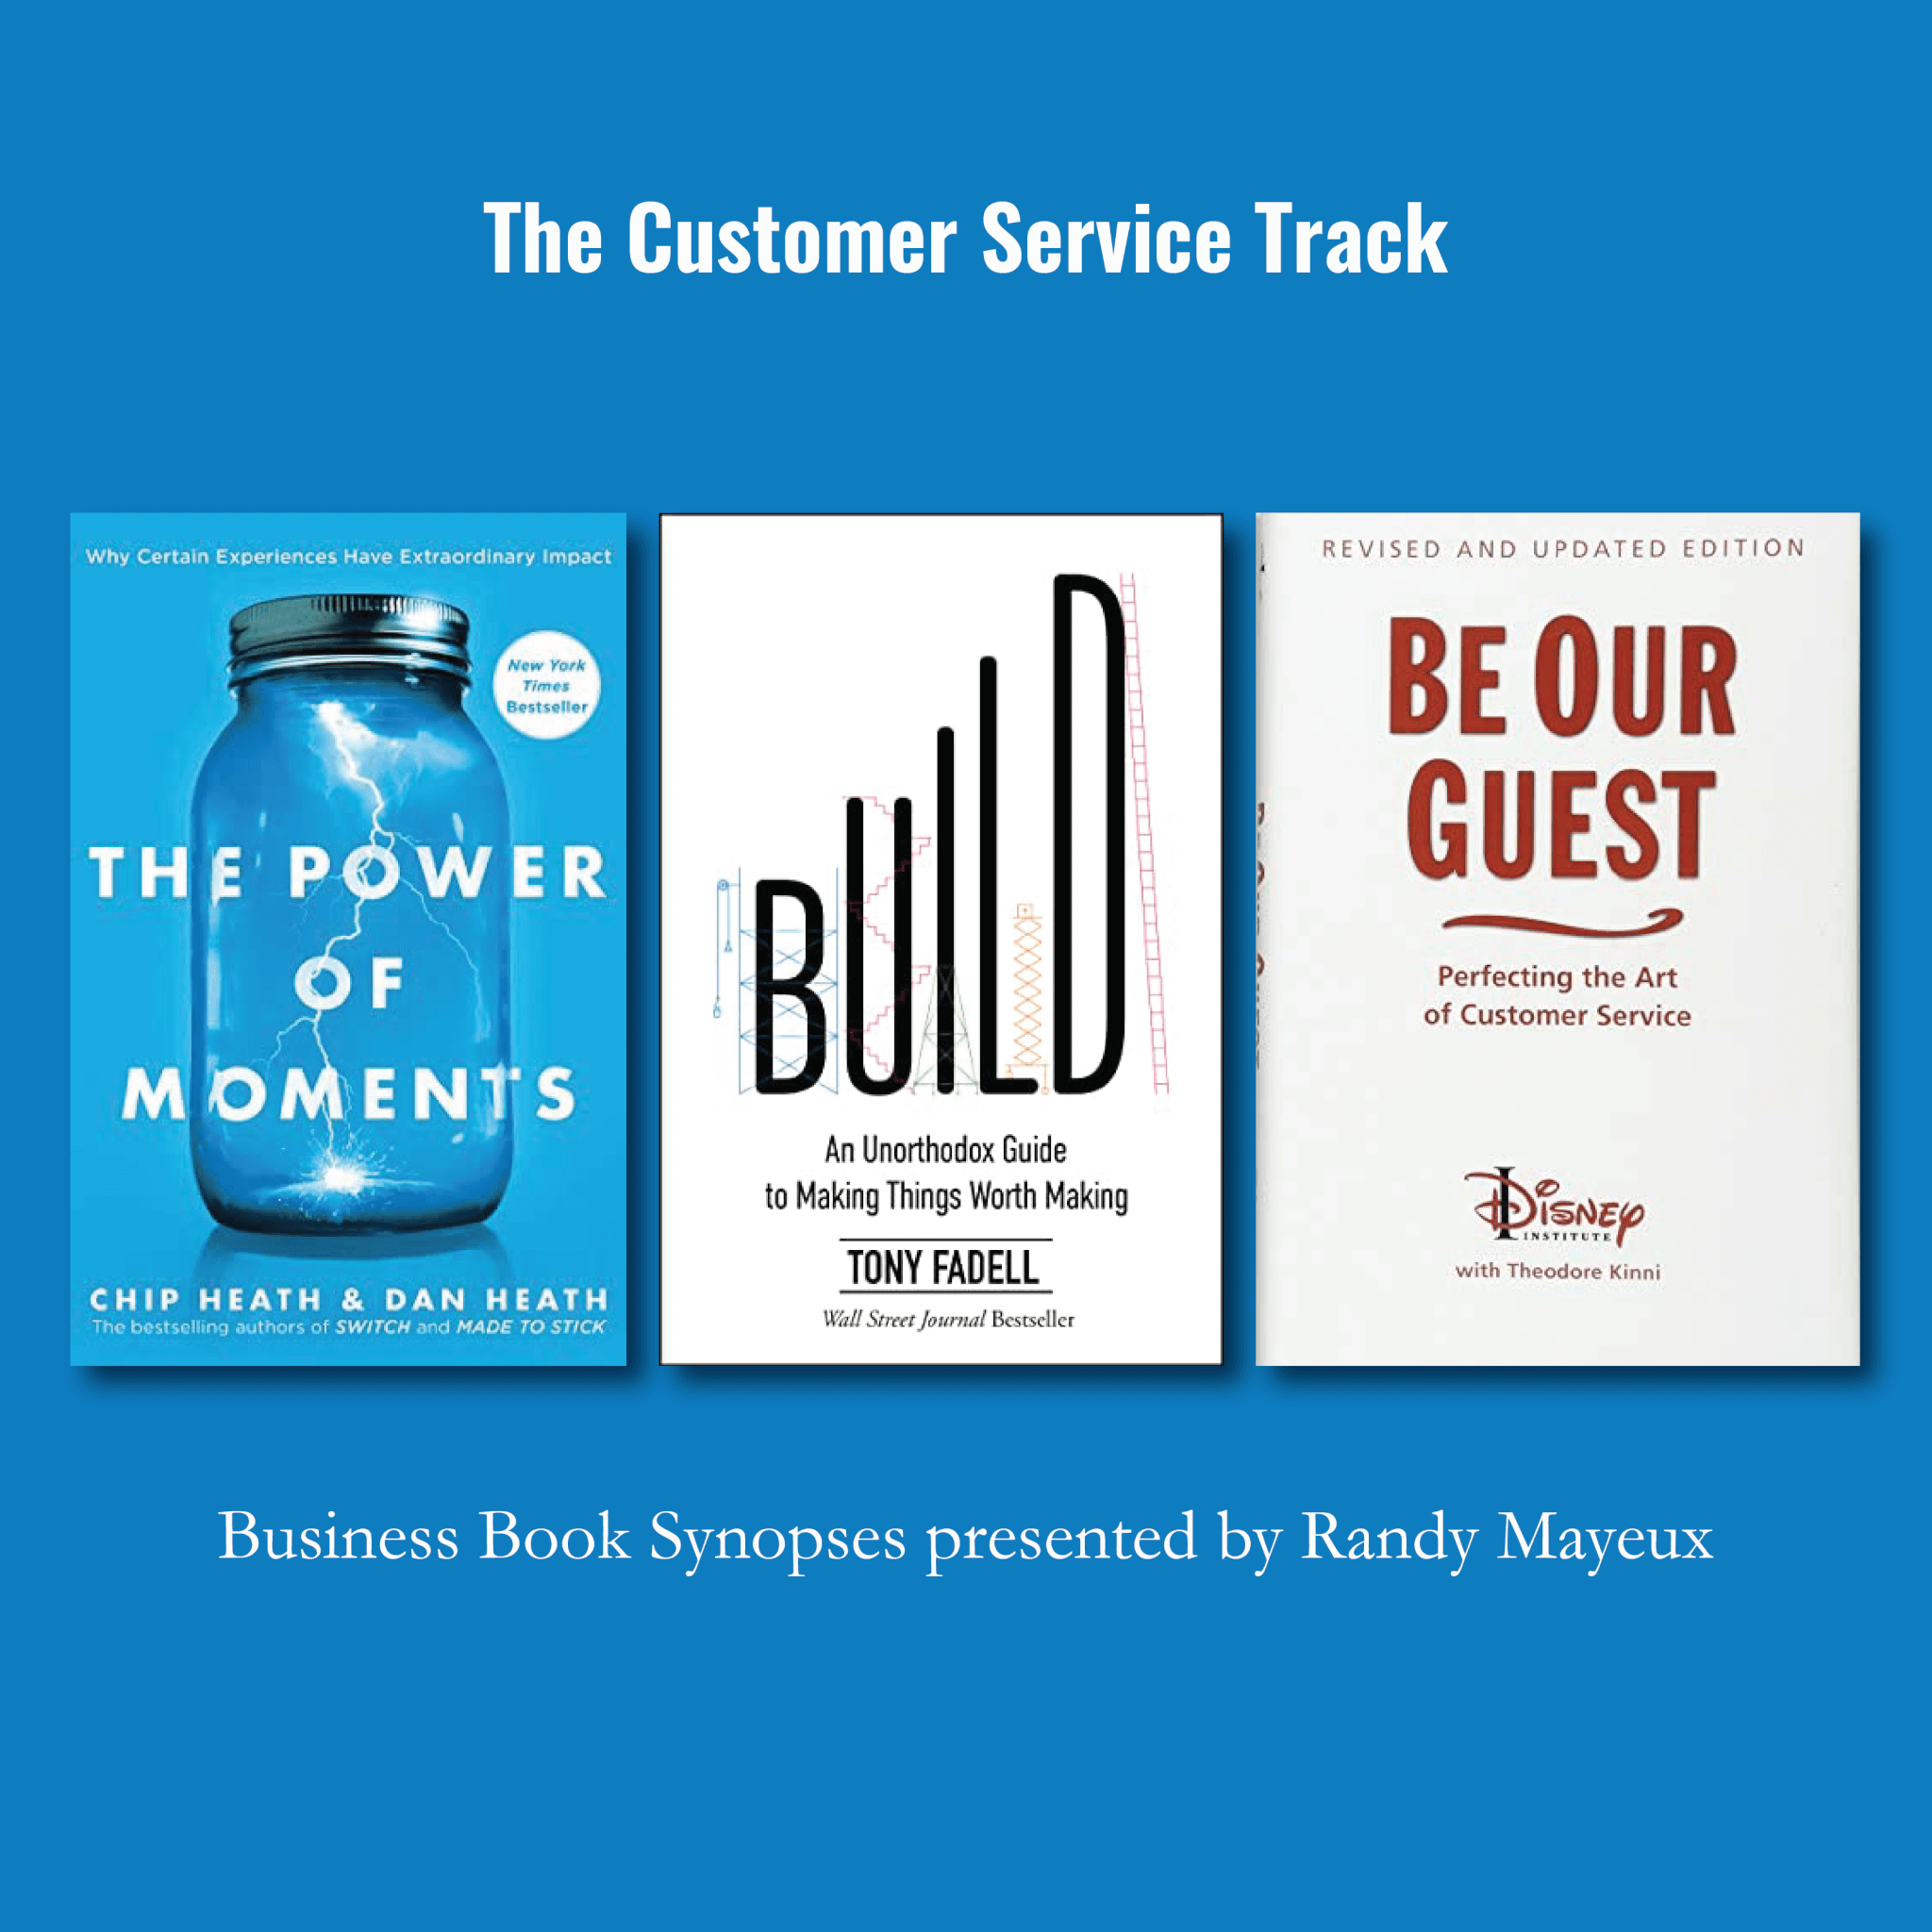 The Customer Service Track; book cover art for: #1 – "The Power of Moments: Why Certain Experiences Have Extraordinary Impact" by Chip Heath & Dan Heath #2 – "Be Our Guest: Revised and Updated Edition: Perfecting the Art of Customer Service (The Disney Institute Leadership Series)" by Walt Disney Company, Michael D. Eisner, Theodore Kinni #3 – "Build: An Unorthodox Guide to Making Things Worth Making" by Tony Fadell